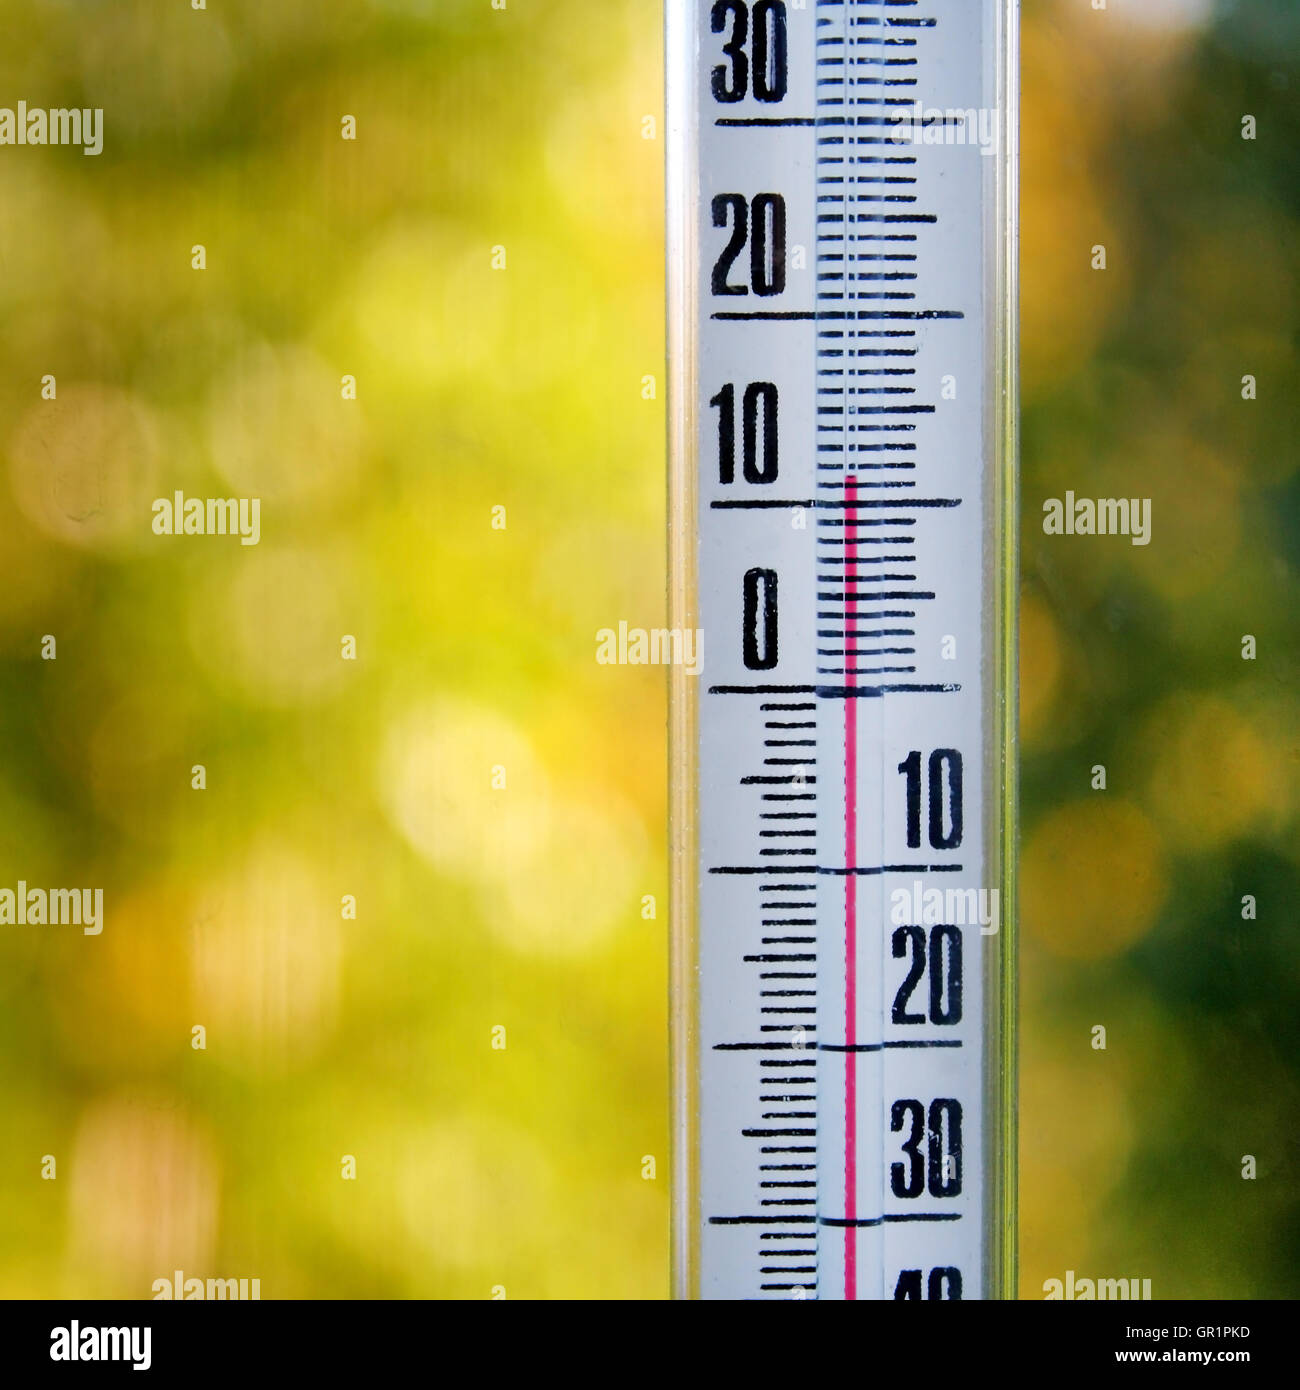 https://c8.alamy.com/comp/GR1PKD/thermometer-to-measure-the-temperature-of-the-weather-GR1PKD.jpg